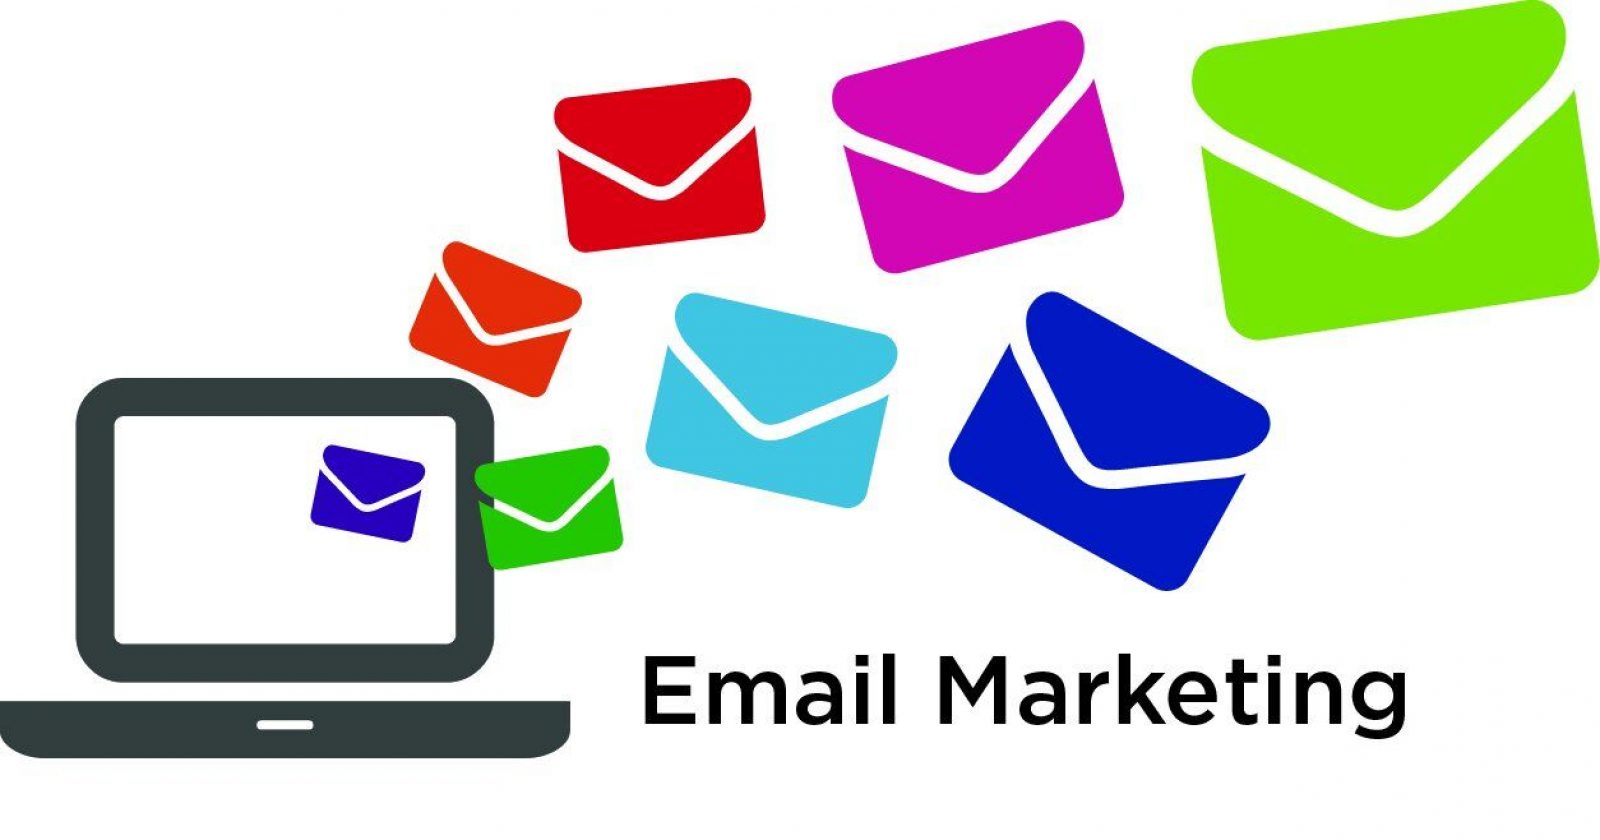 What Is The Difference Between Email Mailing And Email Marketing?